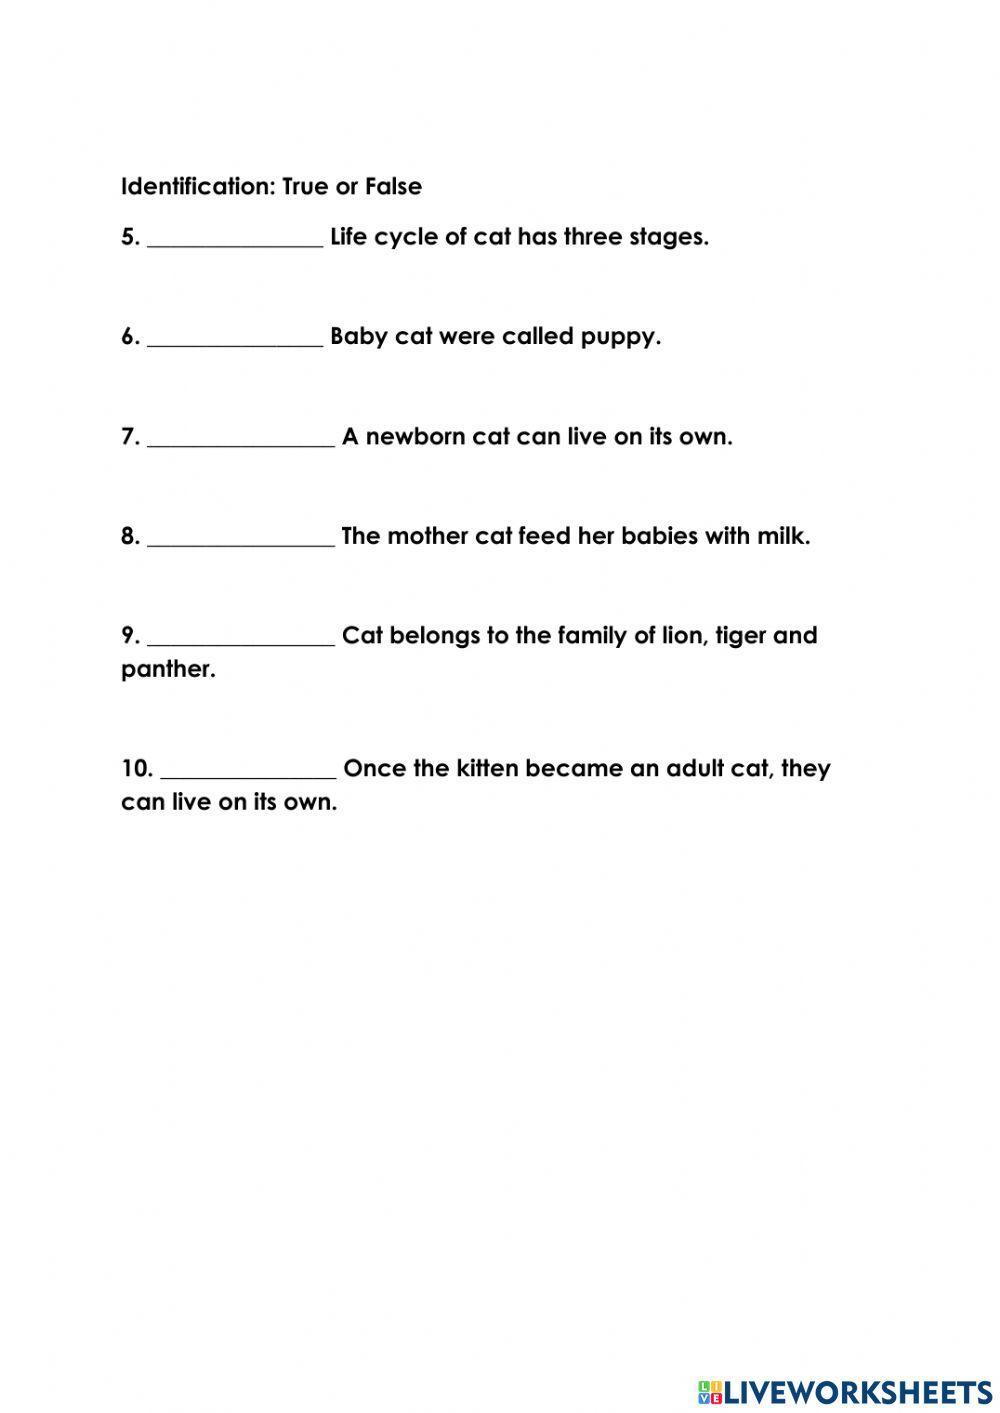 Grade 2 life cycle of cat  activity